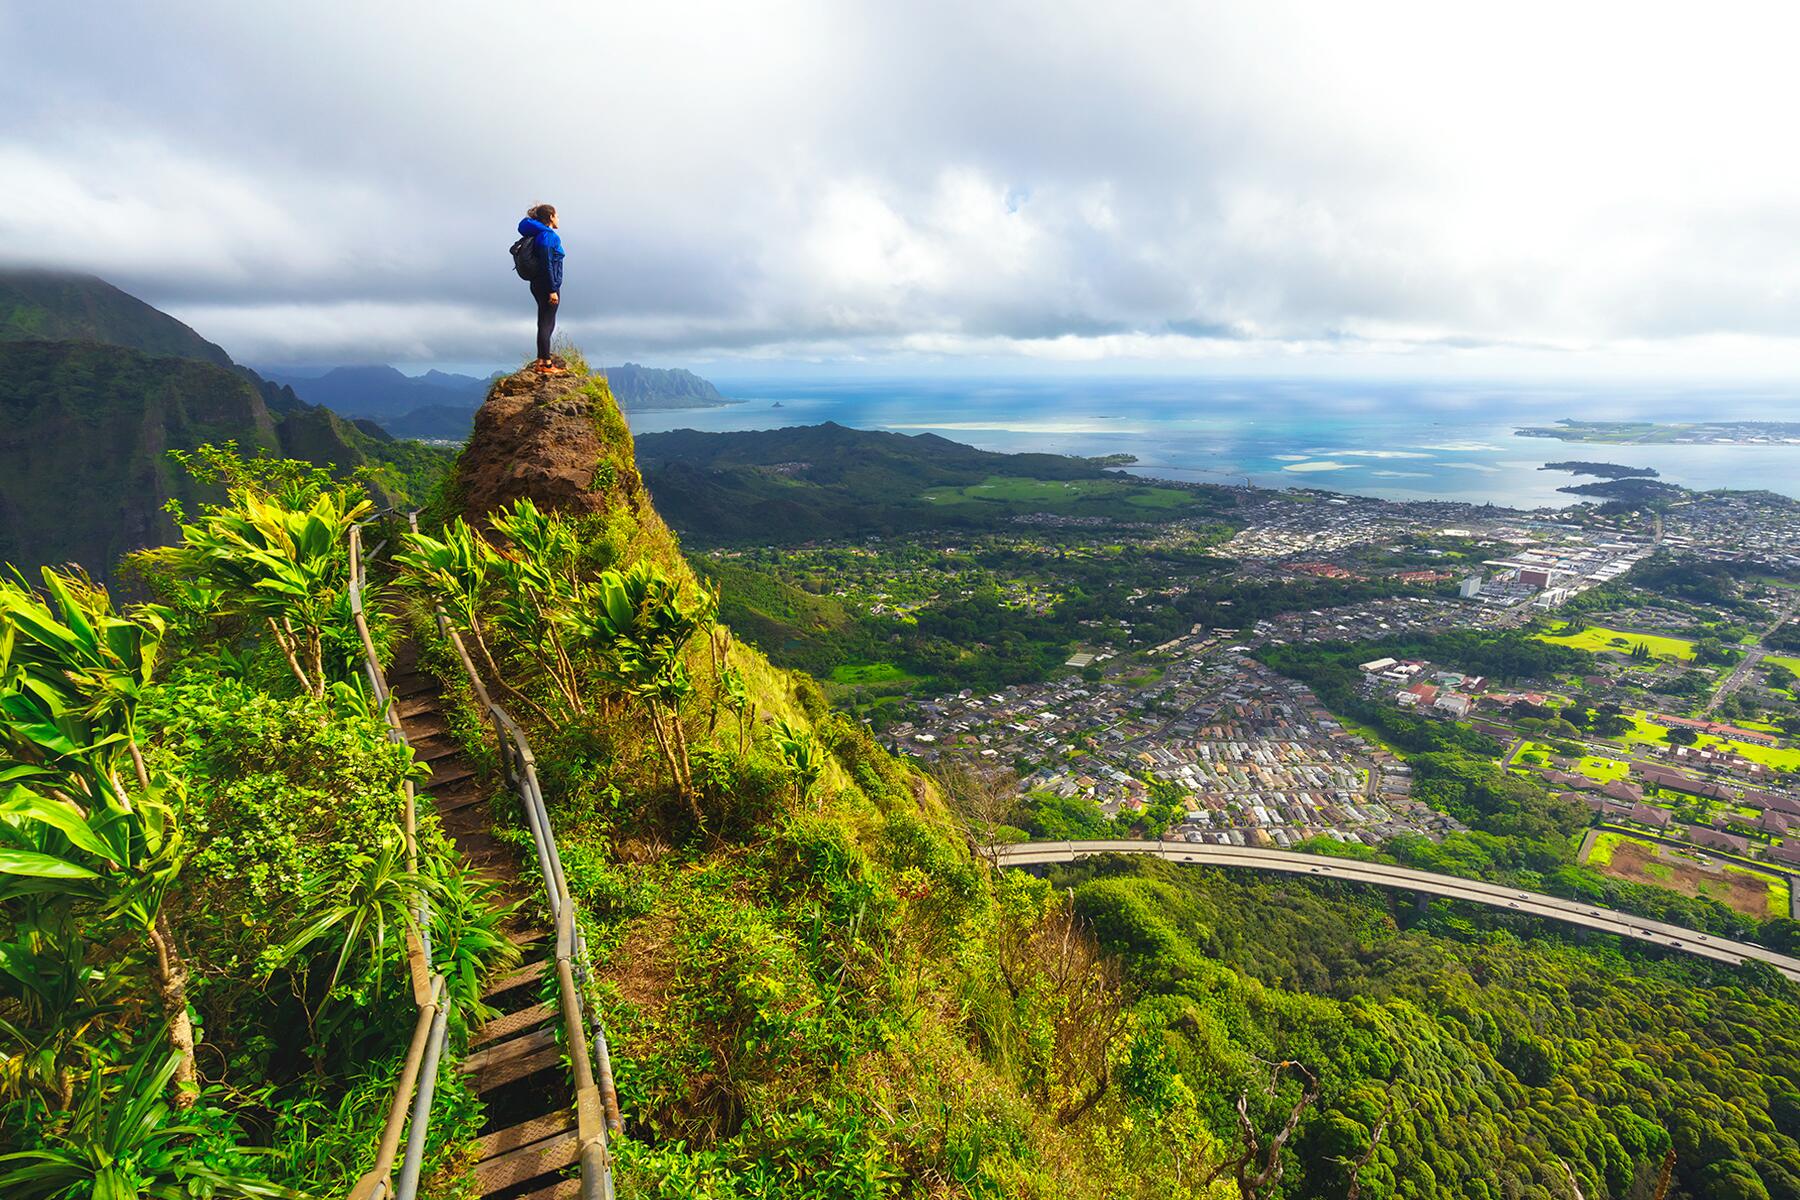 <a href='https://www.fodors.com/world/north-america/usa/hawaii/experiences/news/photos/40-ultimate-things-to-do-in-hawaii#'>From &quot;50 Ultimate Things to Do in Hawaii&quot;</a>